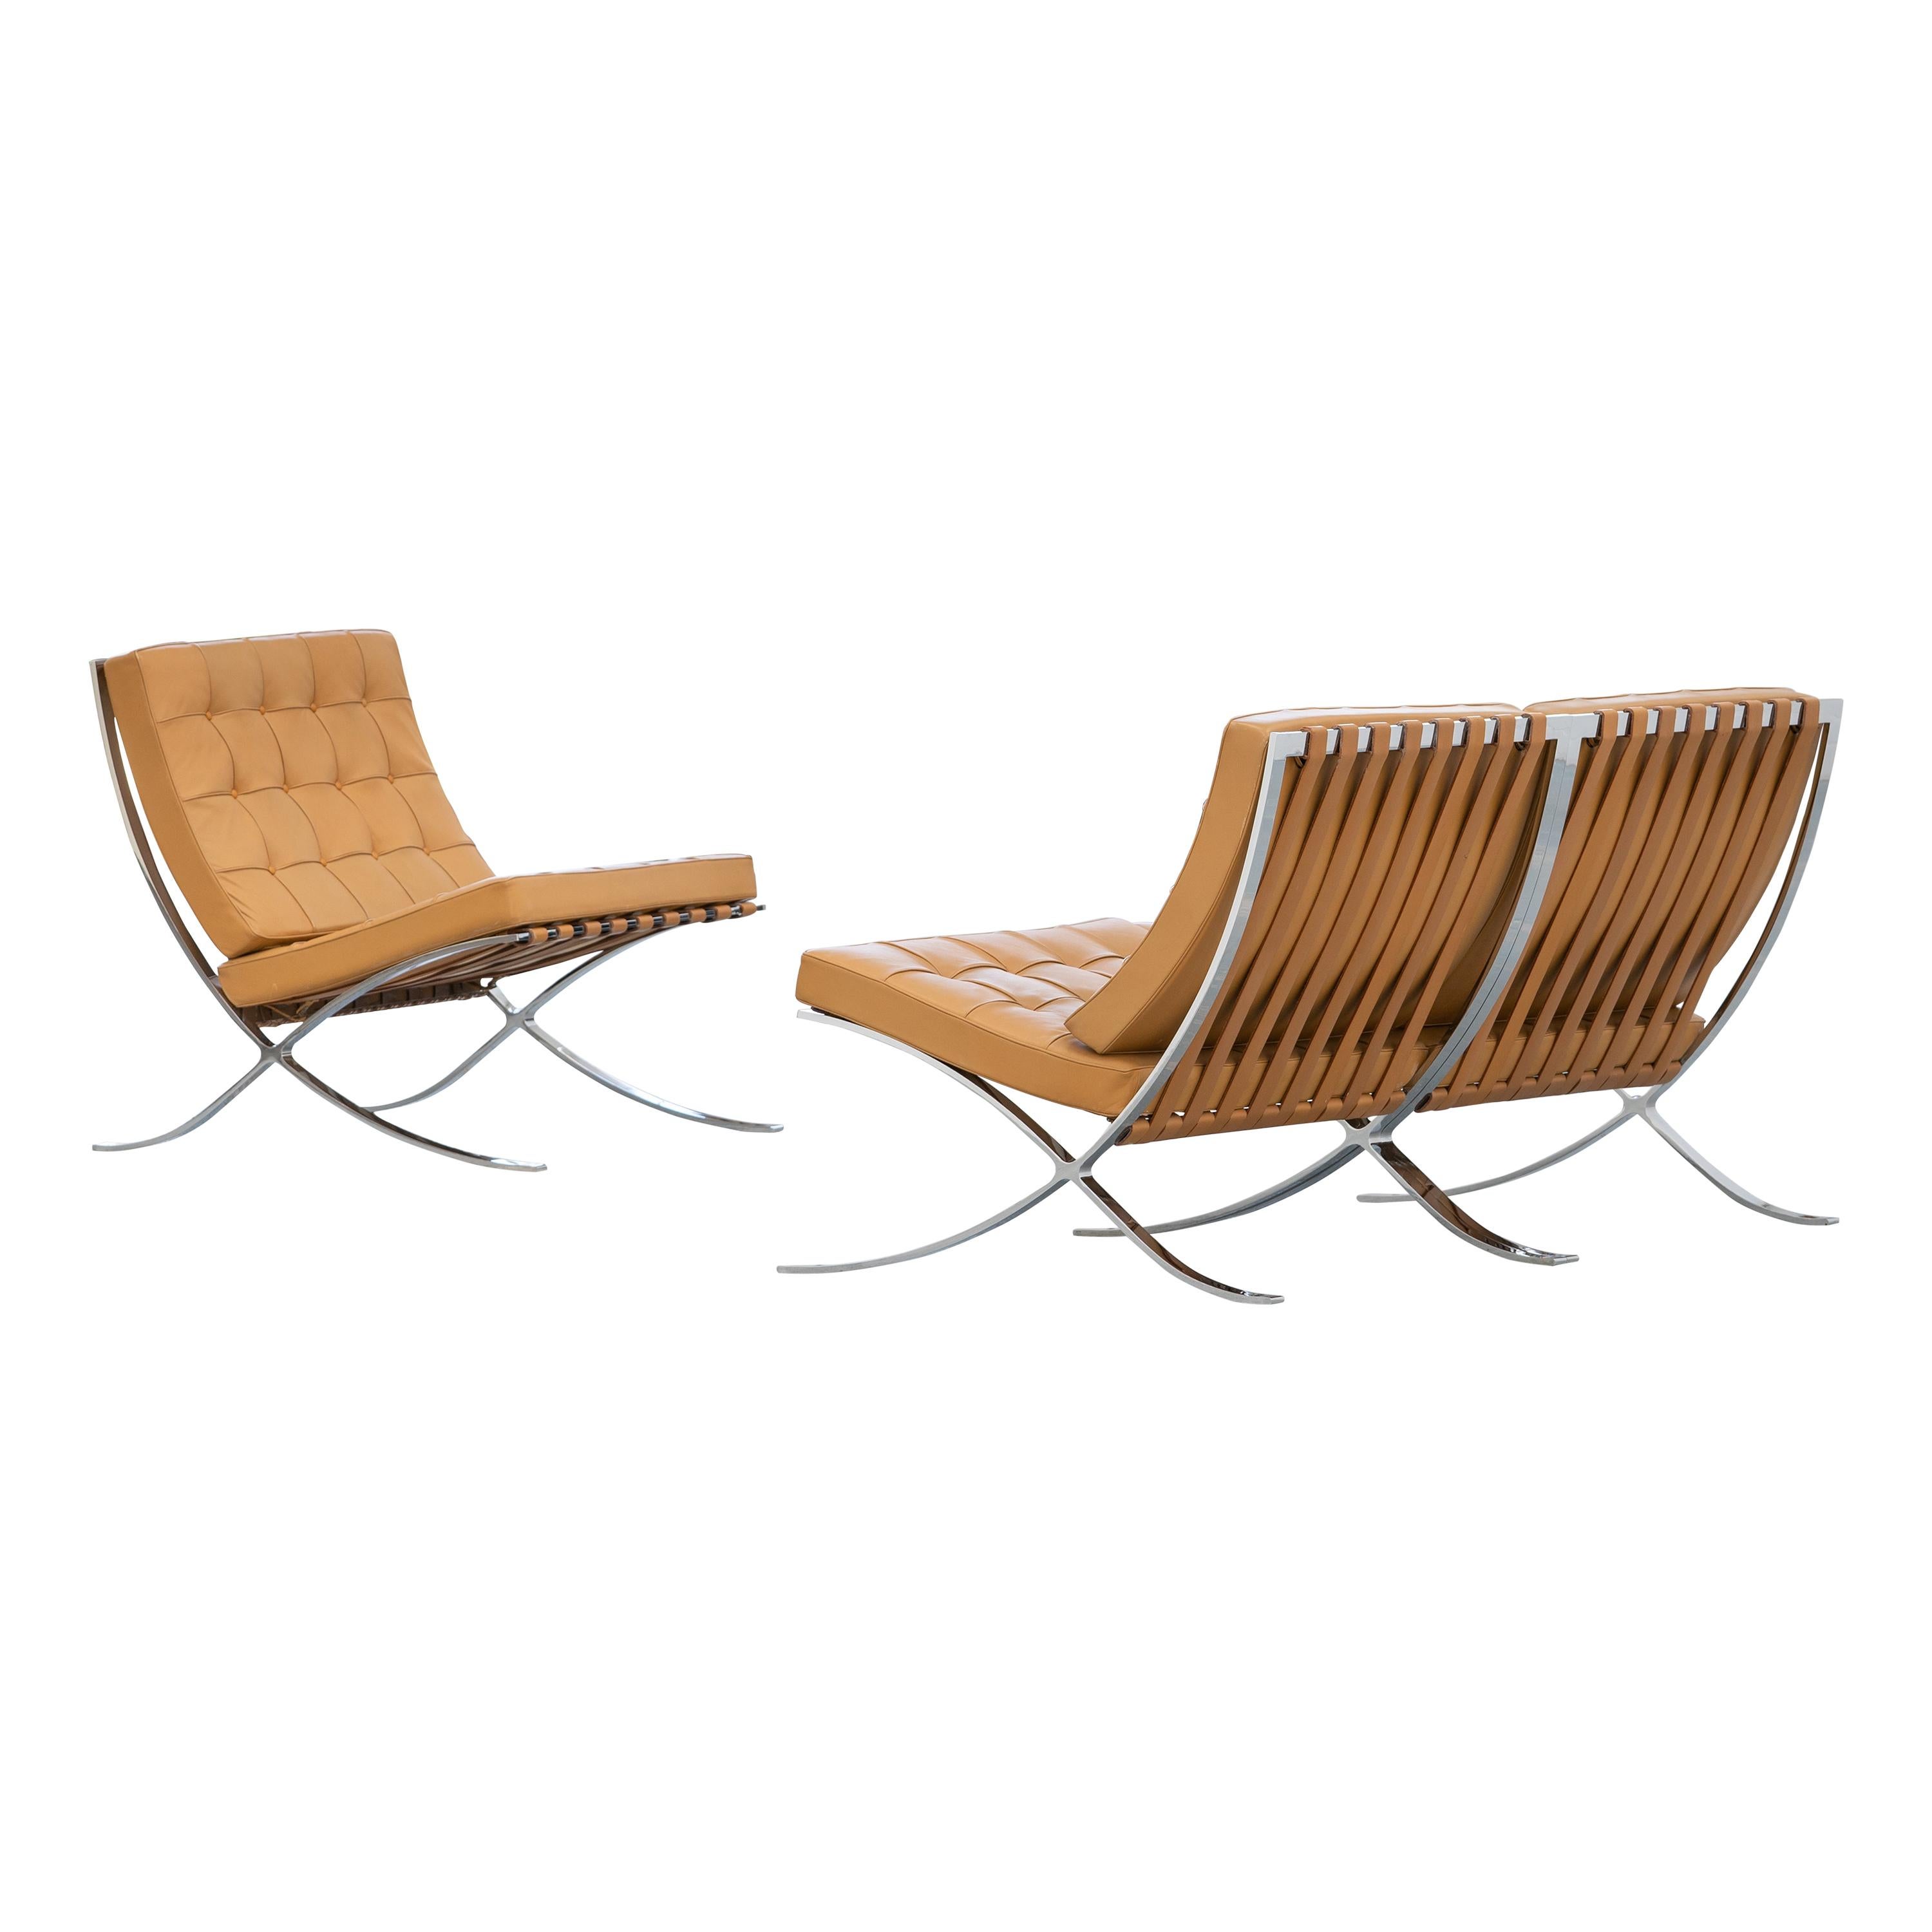 L. Mies van der Rohe, 3 Barcelona Chair, 1962 Edition by Knoll International